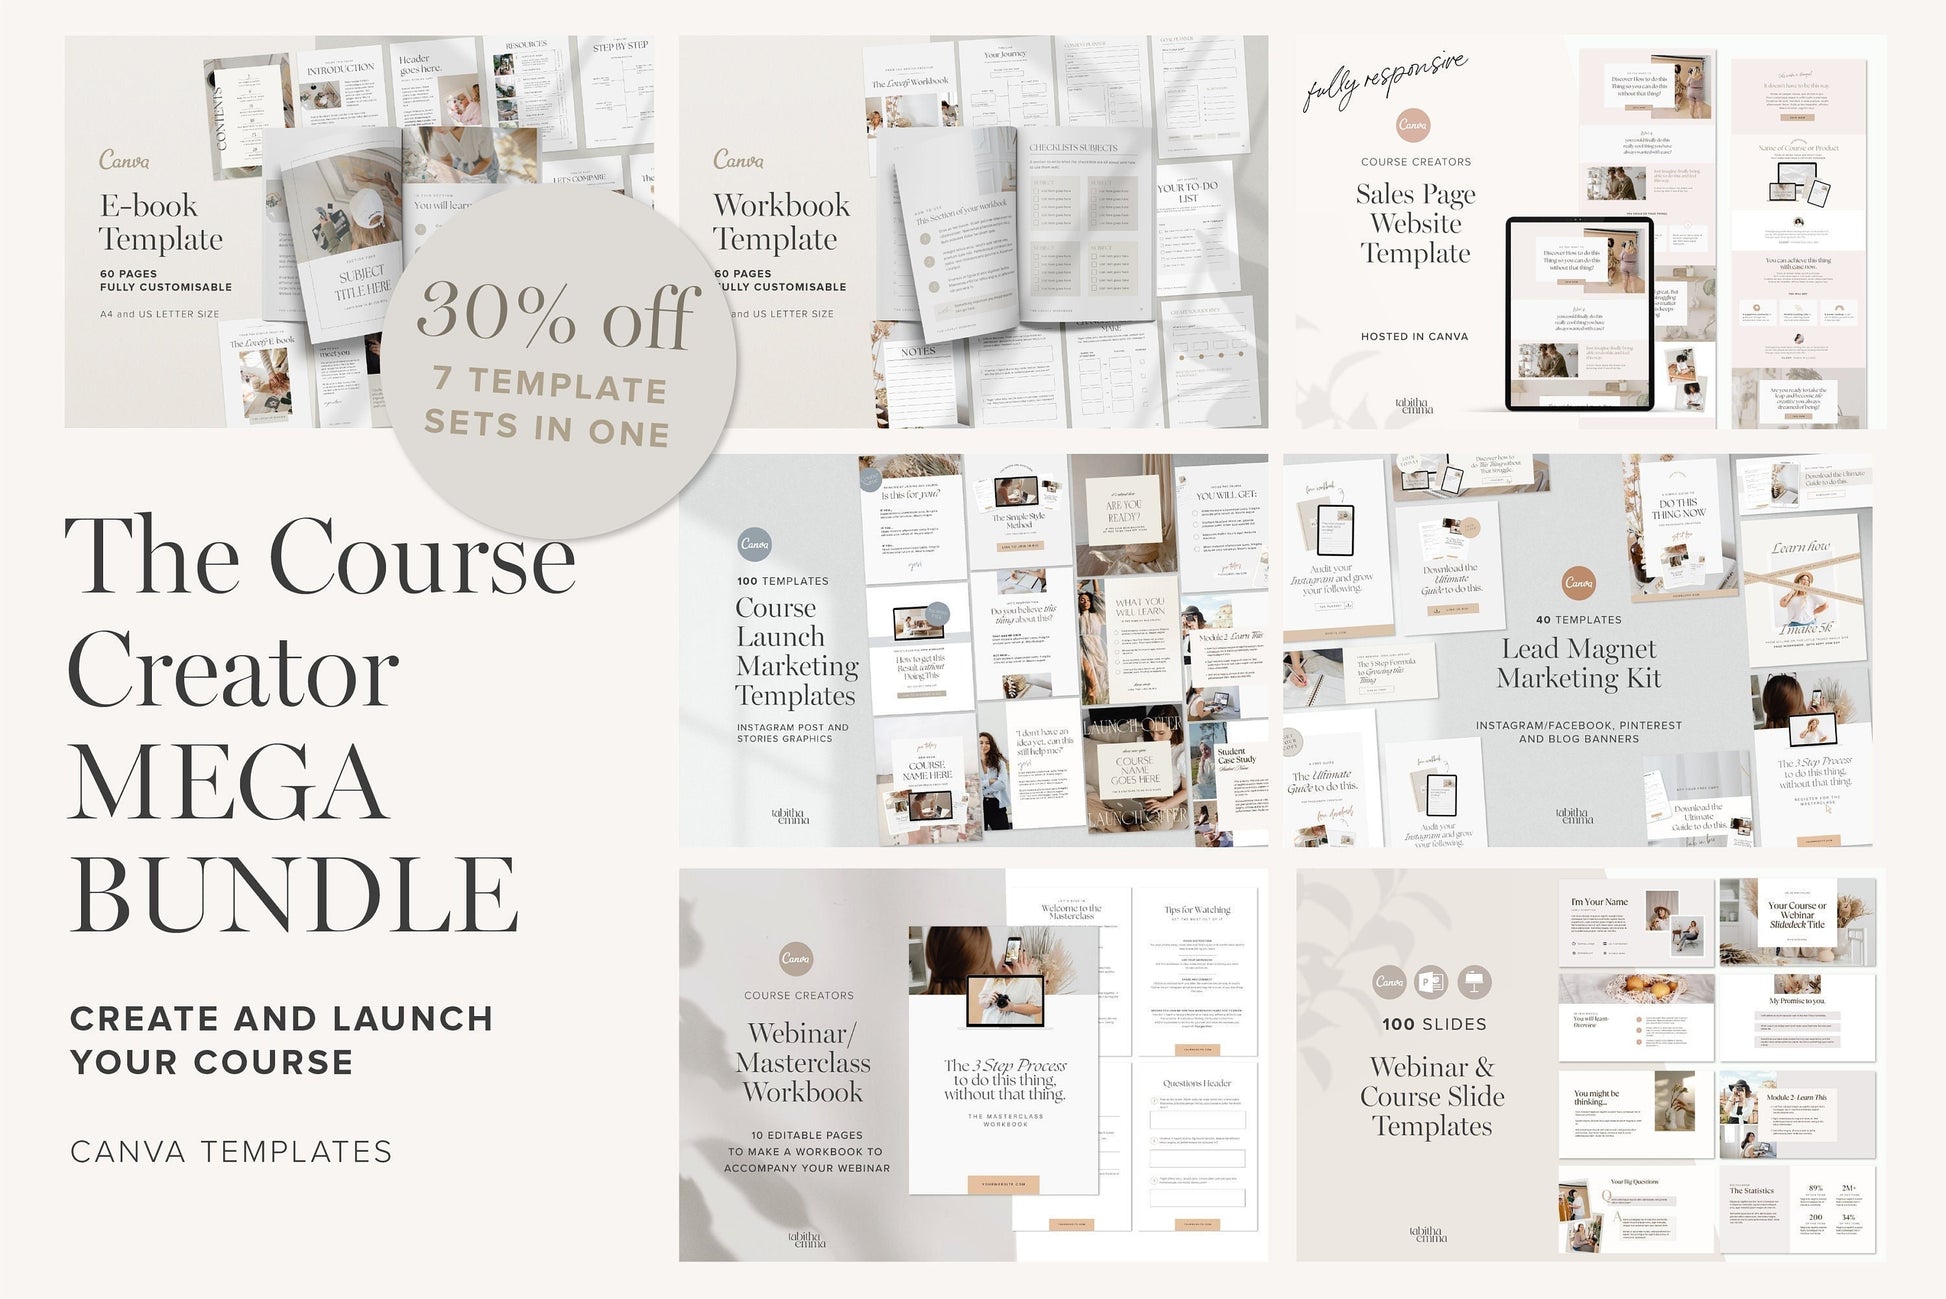 Course creator templates for Canva. Webinar, workbook, ebook, lead magnet and launch templates